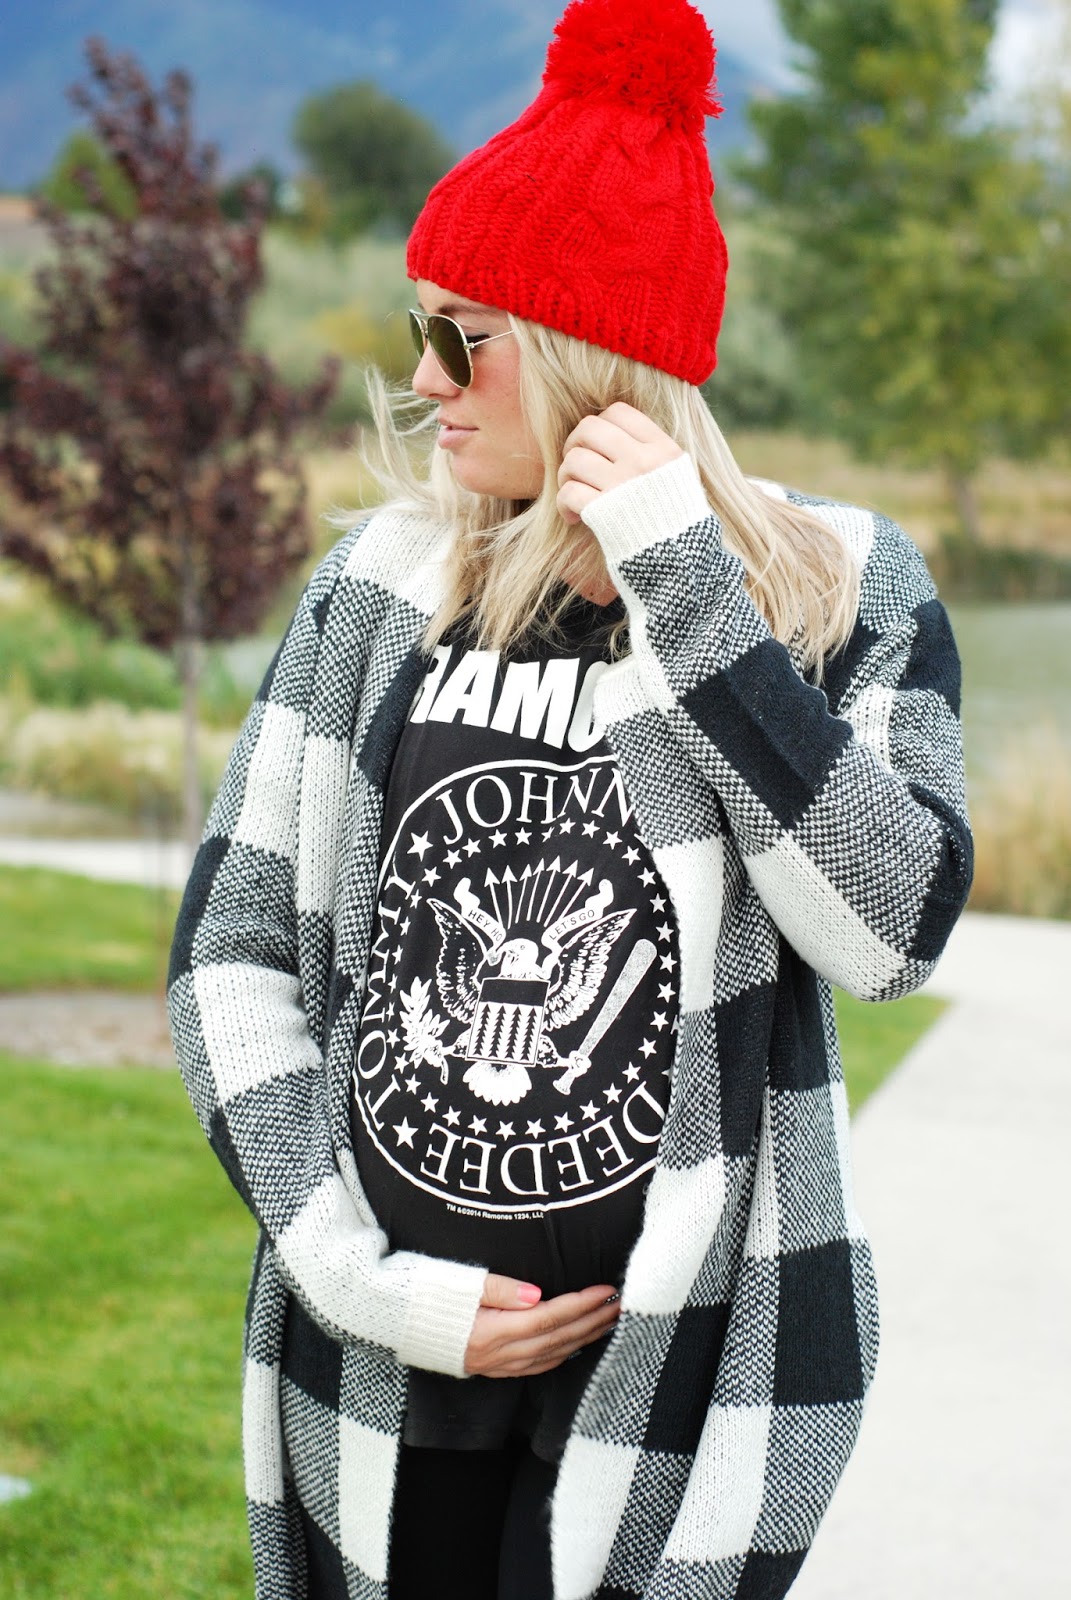 Ramones Graphic Tee, Band Tee, Layering for Fall